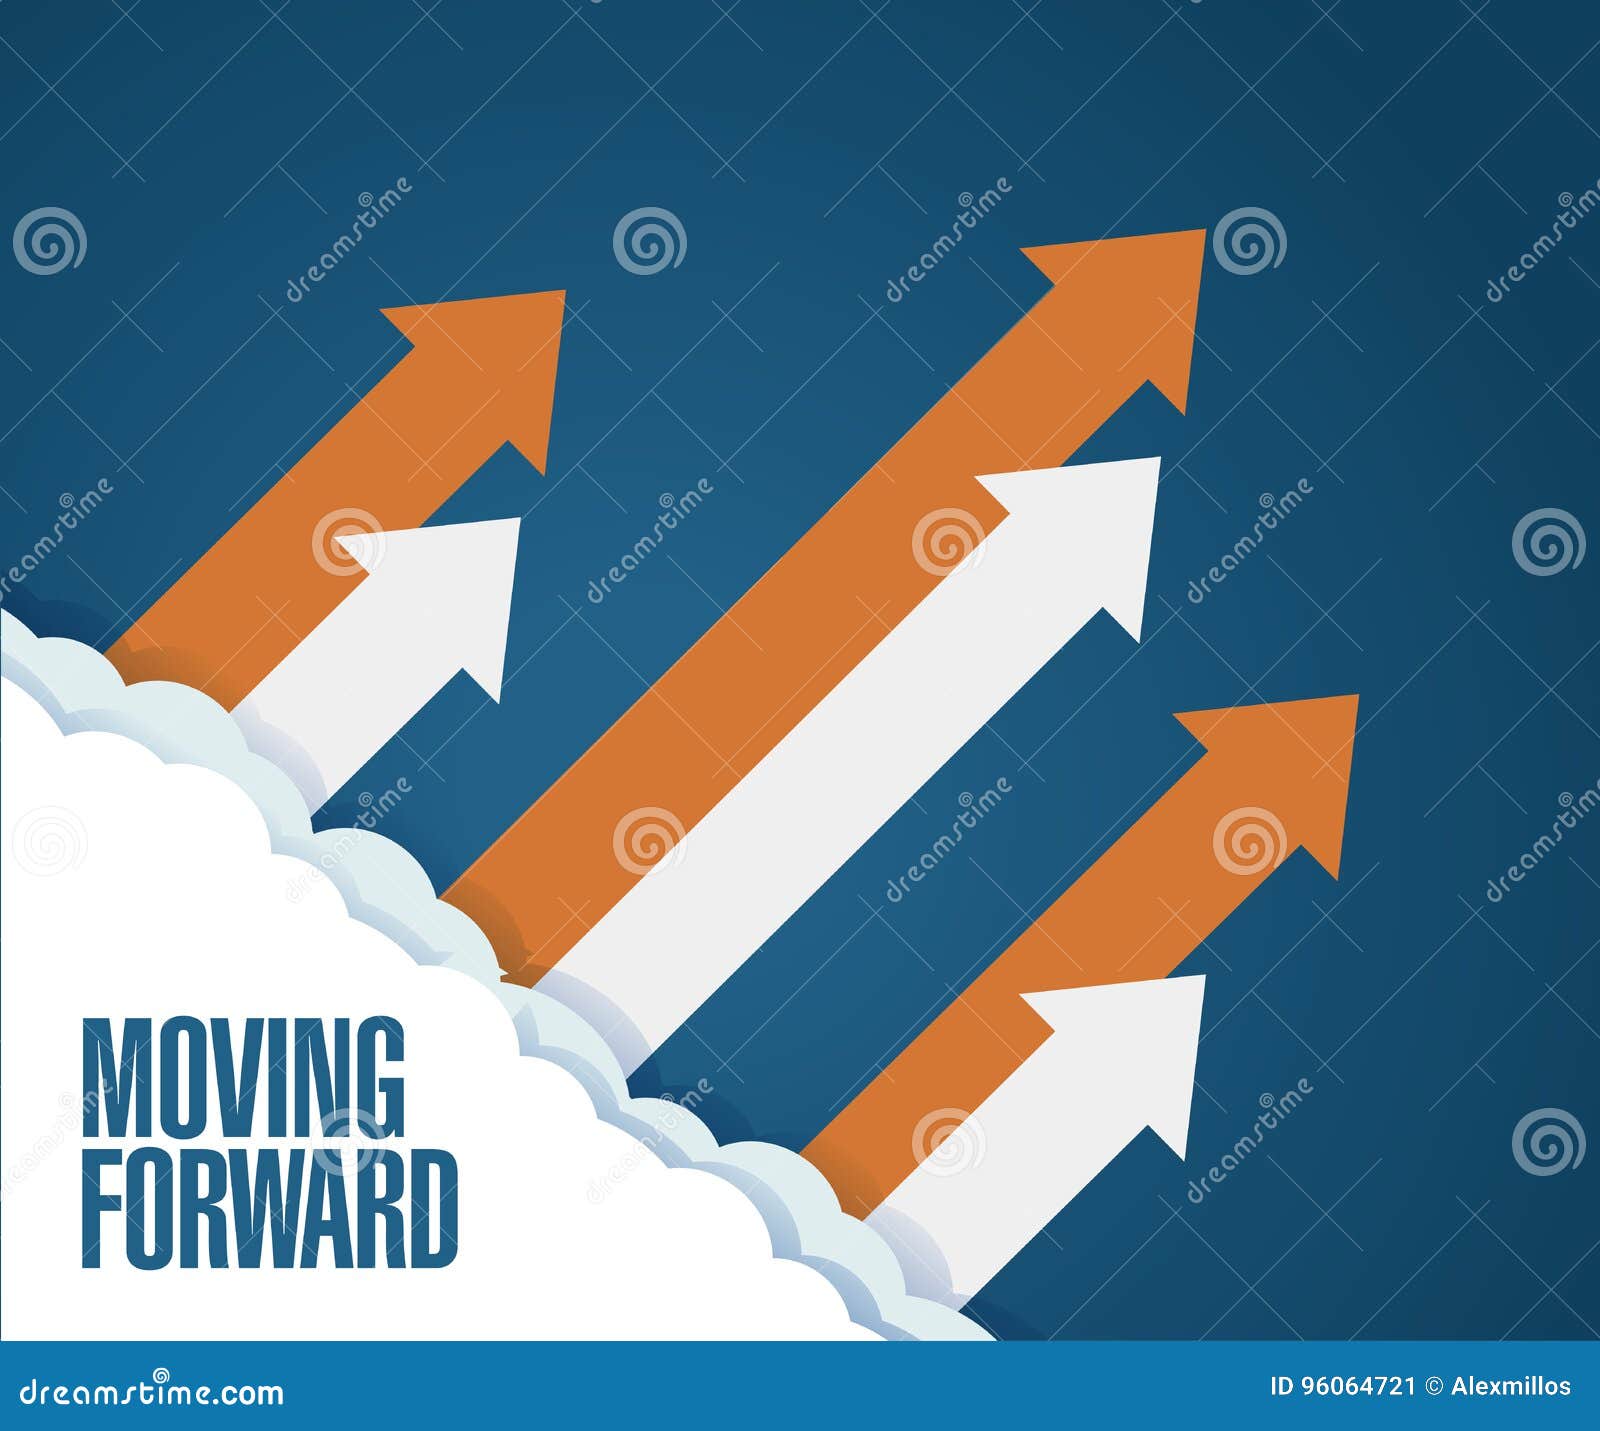 moving forward concept. arrows moving up